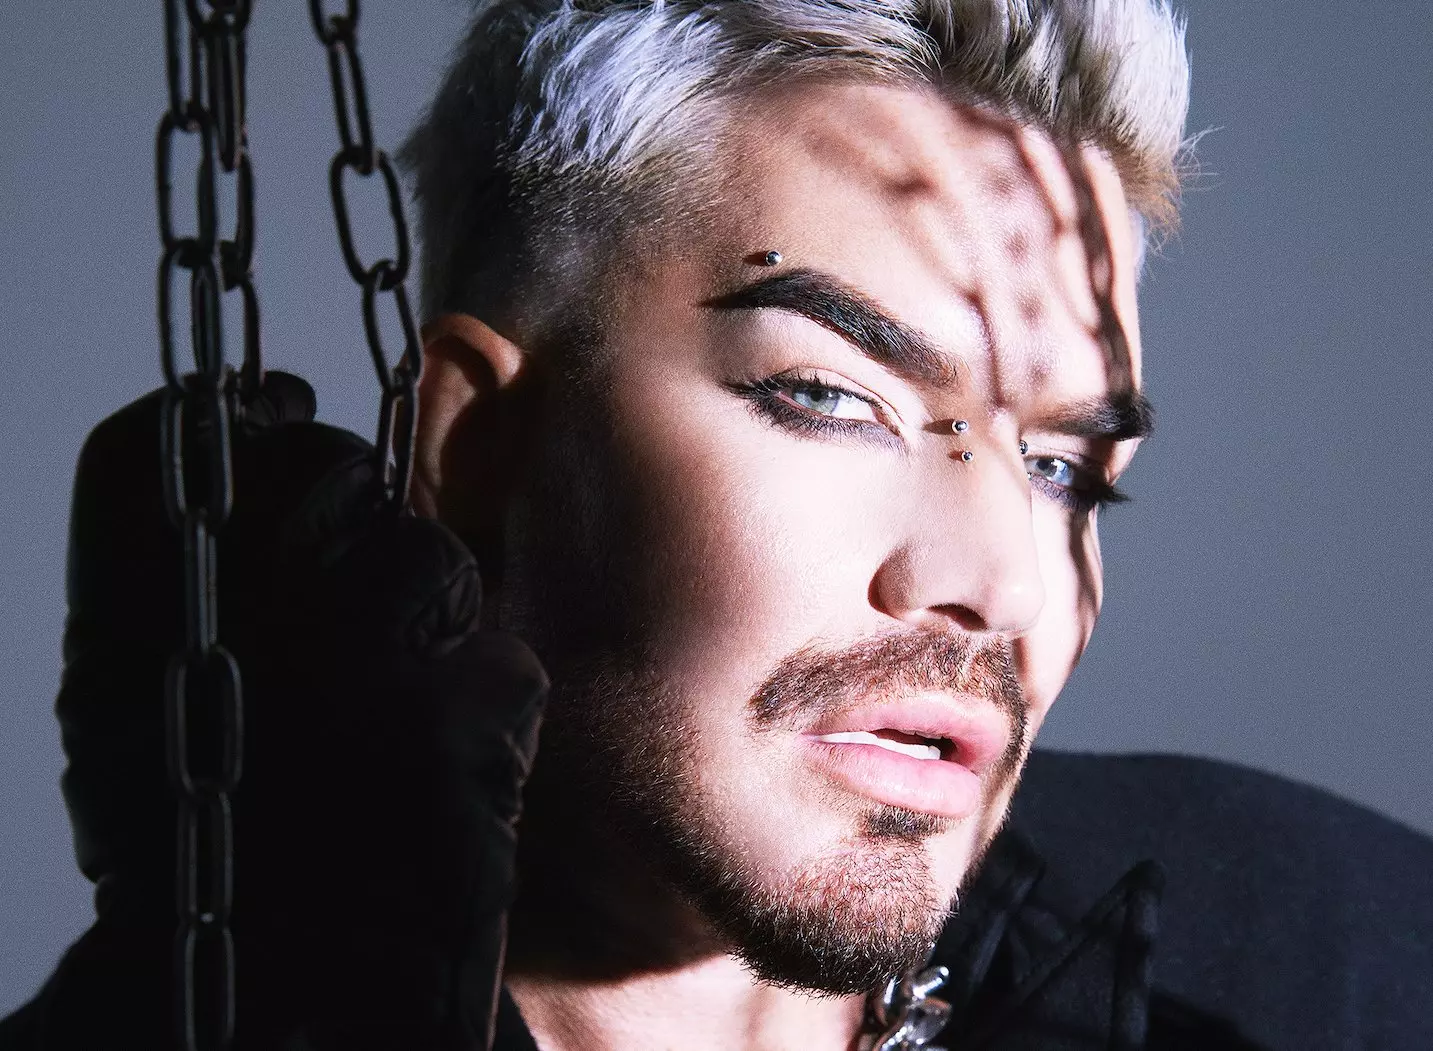 Inside Adam Lambert's 'Afters': How '90s House, Clubbing & Lots Of Sex Inspired His Most "Liberated" Music Yet